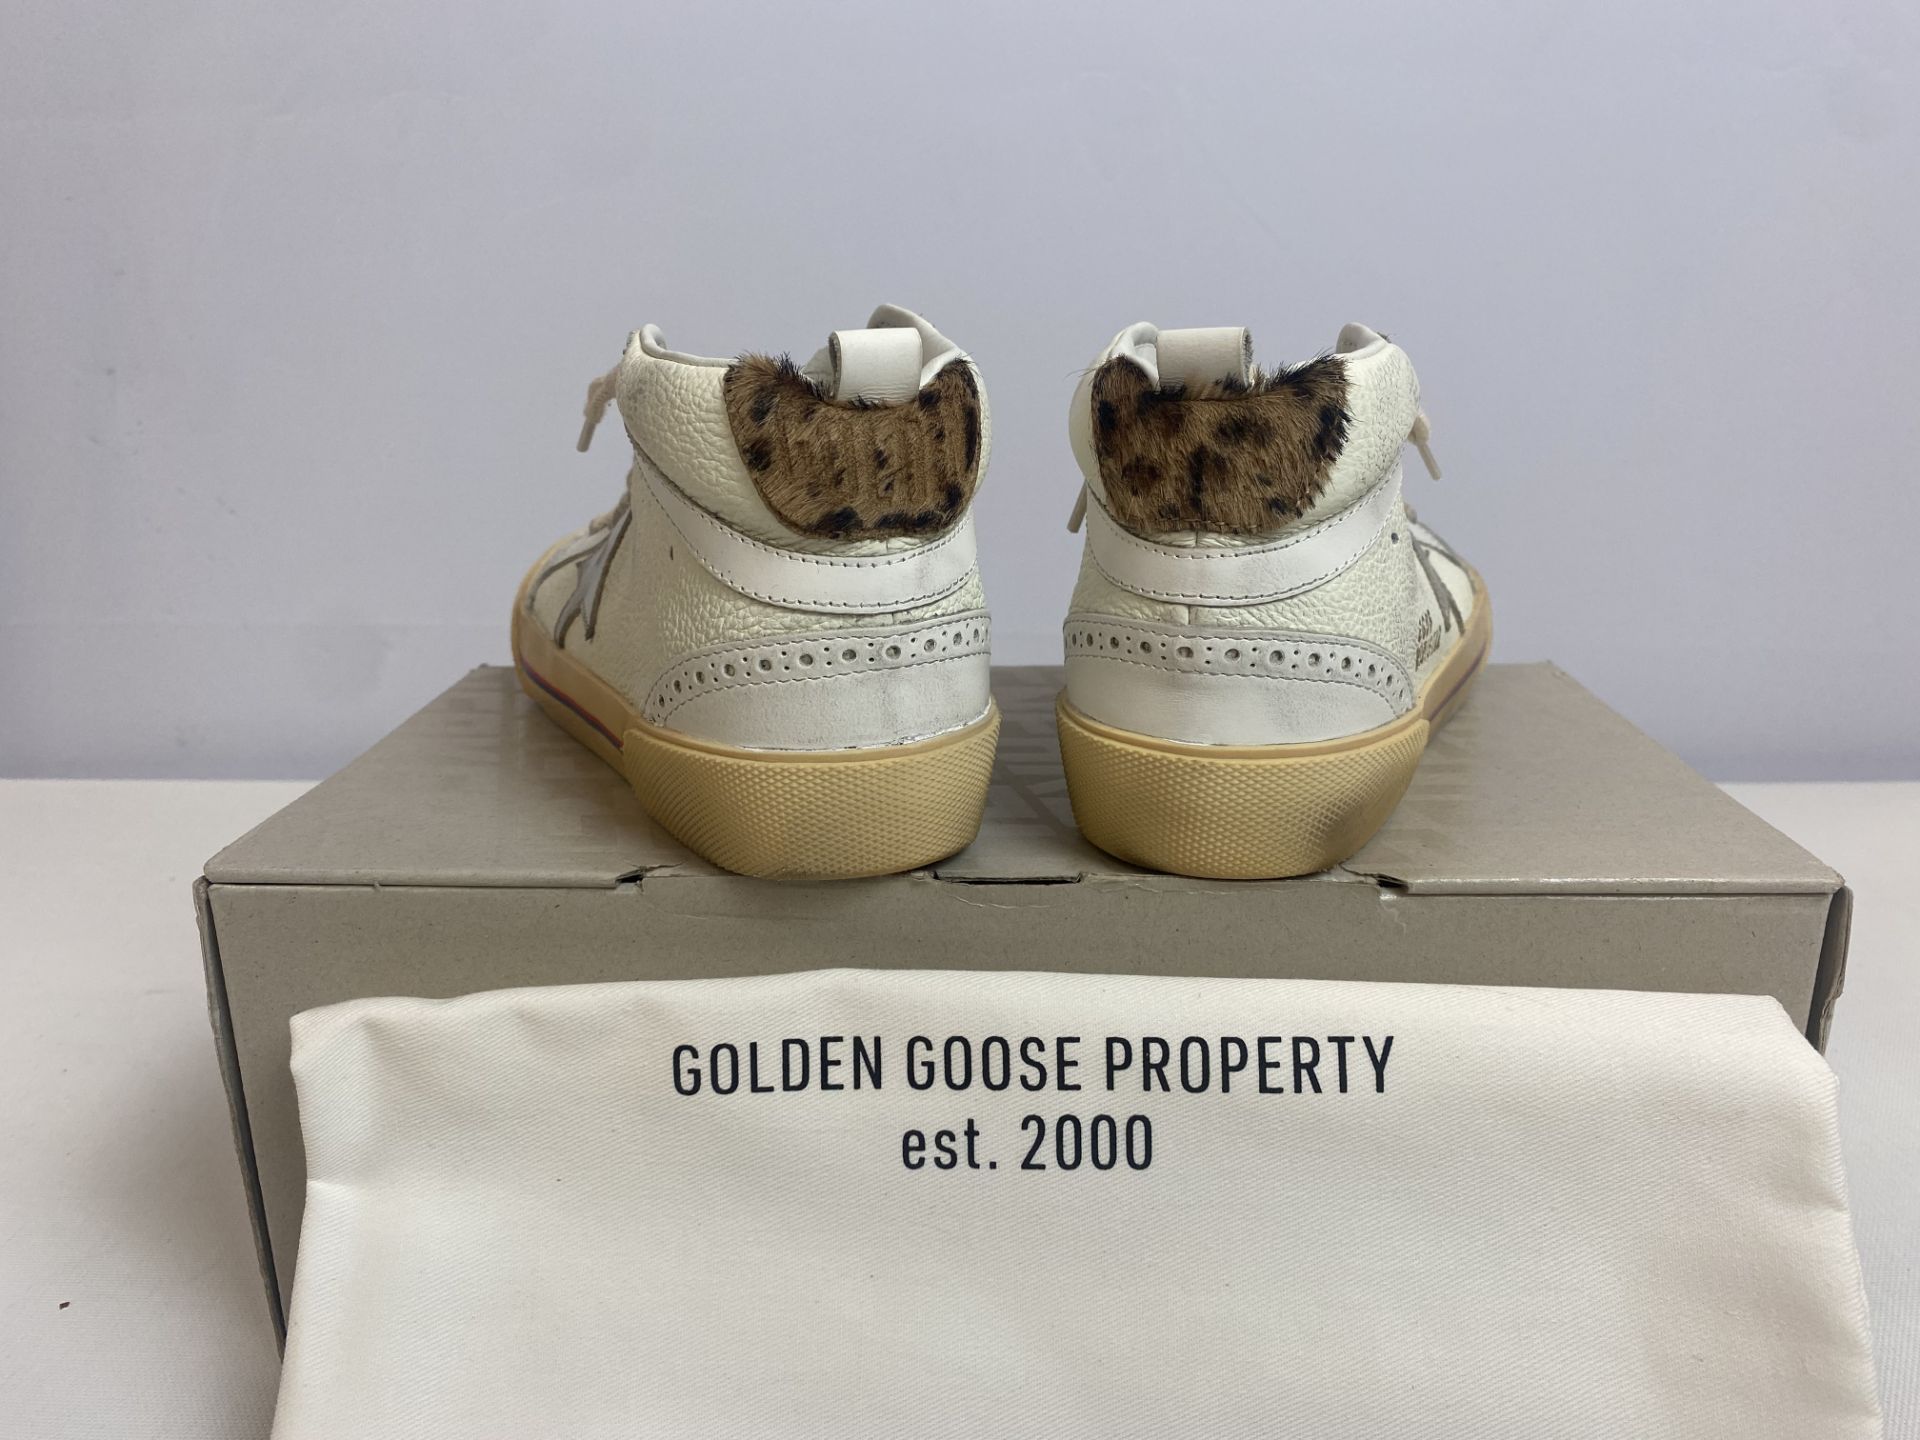 Golden Goose SNKR MIDSTAR SIMID STAR CLASSIC, Size: 36, Color: WHITE, Retail Price: $600 - Image 2 of 4